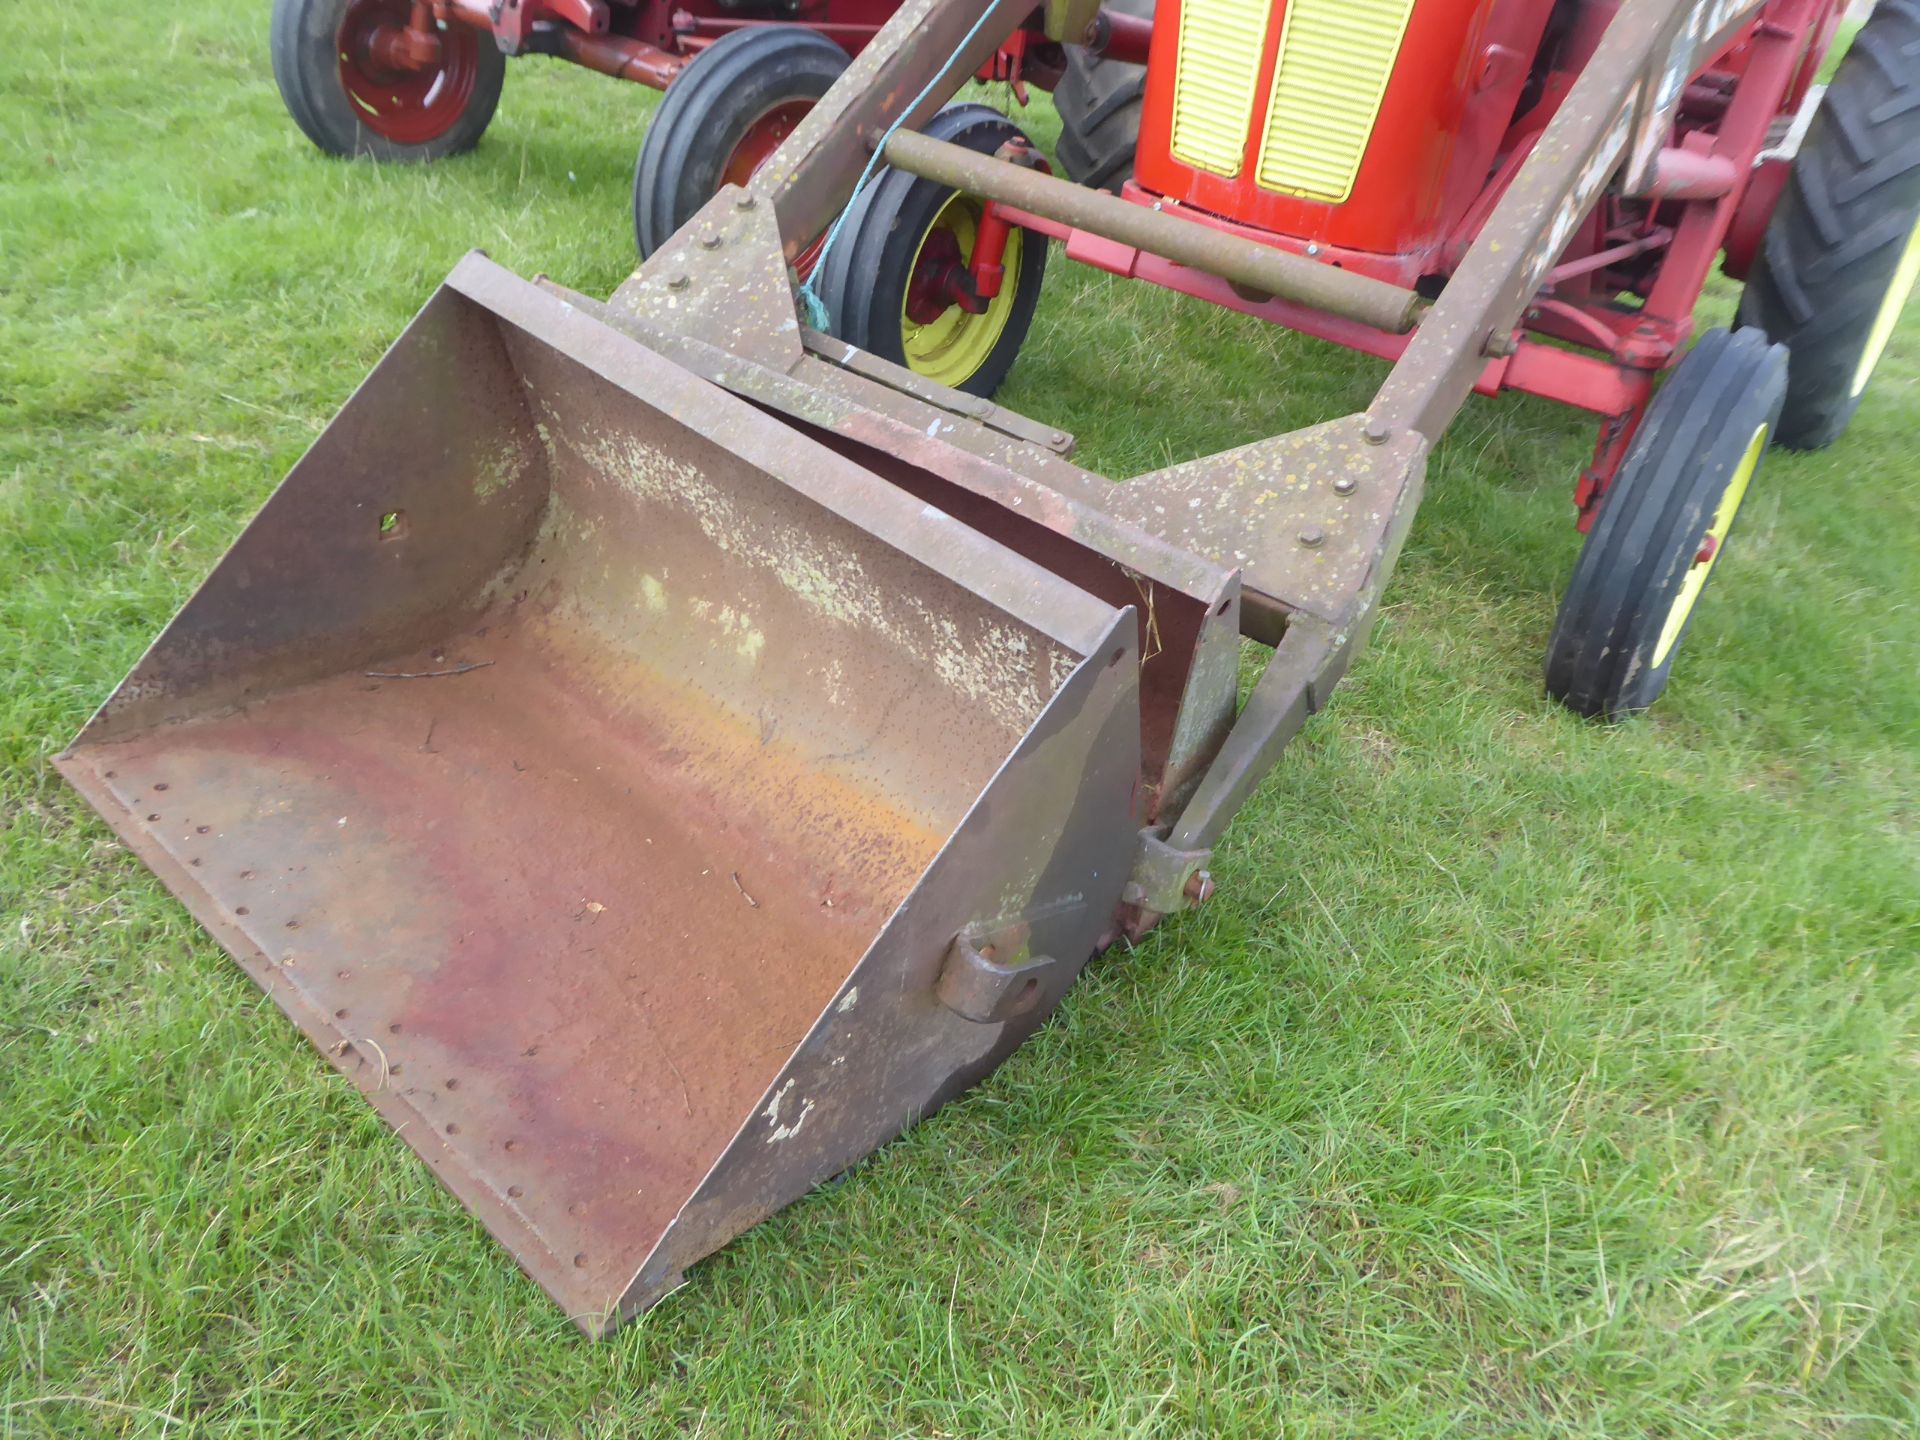 1961 David Brown 880 Implematic tractor with loader, tines and bucket, gwo NO VAT - Image 5 of 5